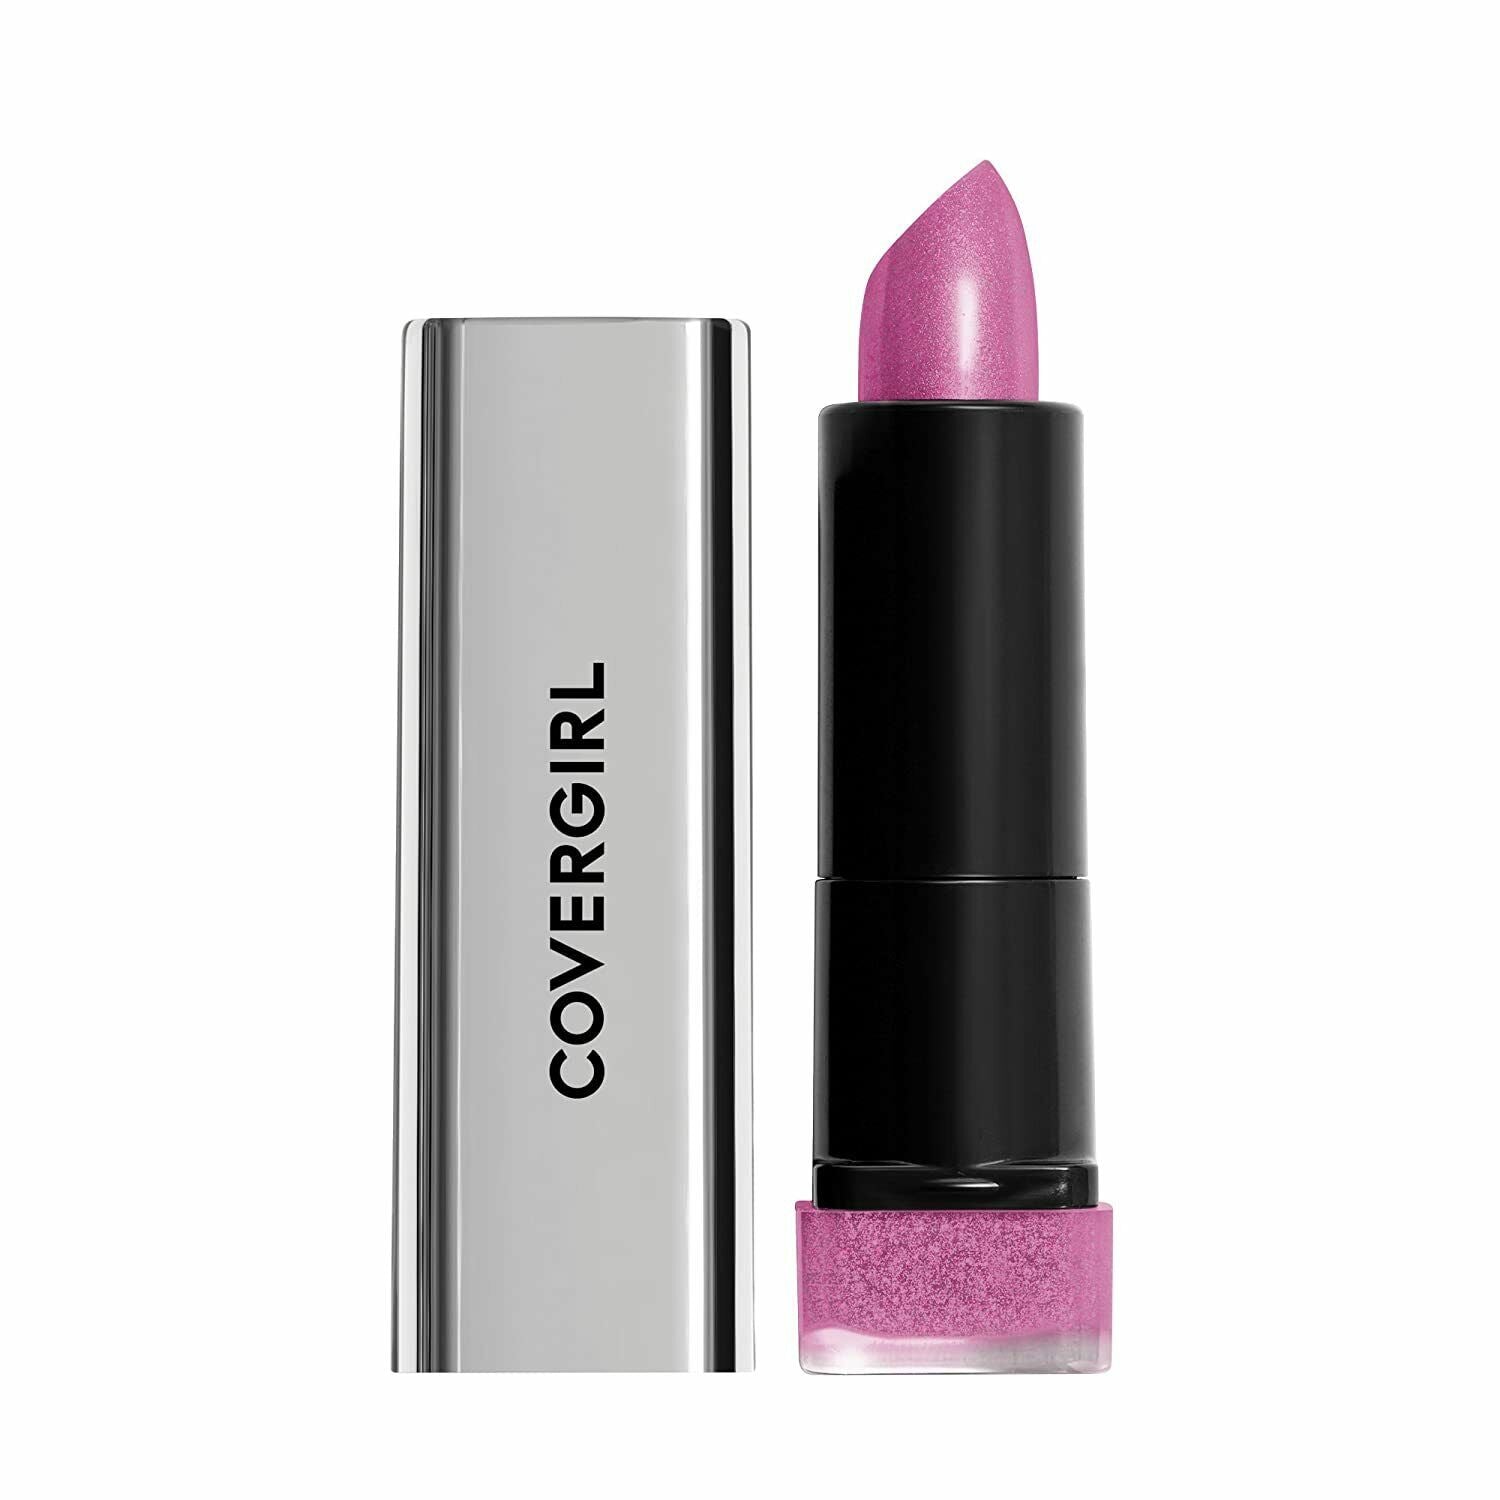 COVERGIRL Exhibitionist Lipstick Metallic, Love Me Later 515, 0.123 Ounce